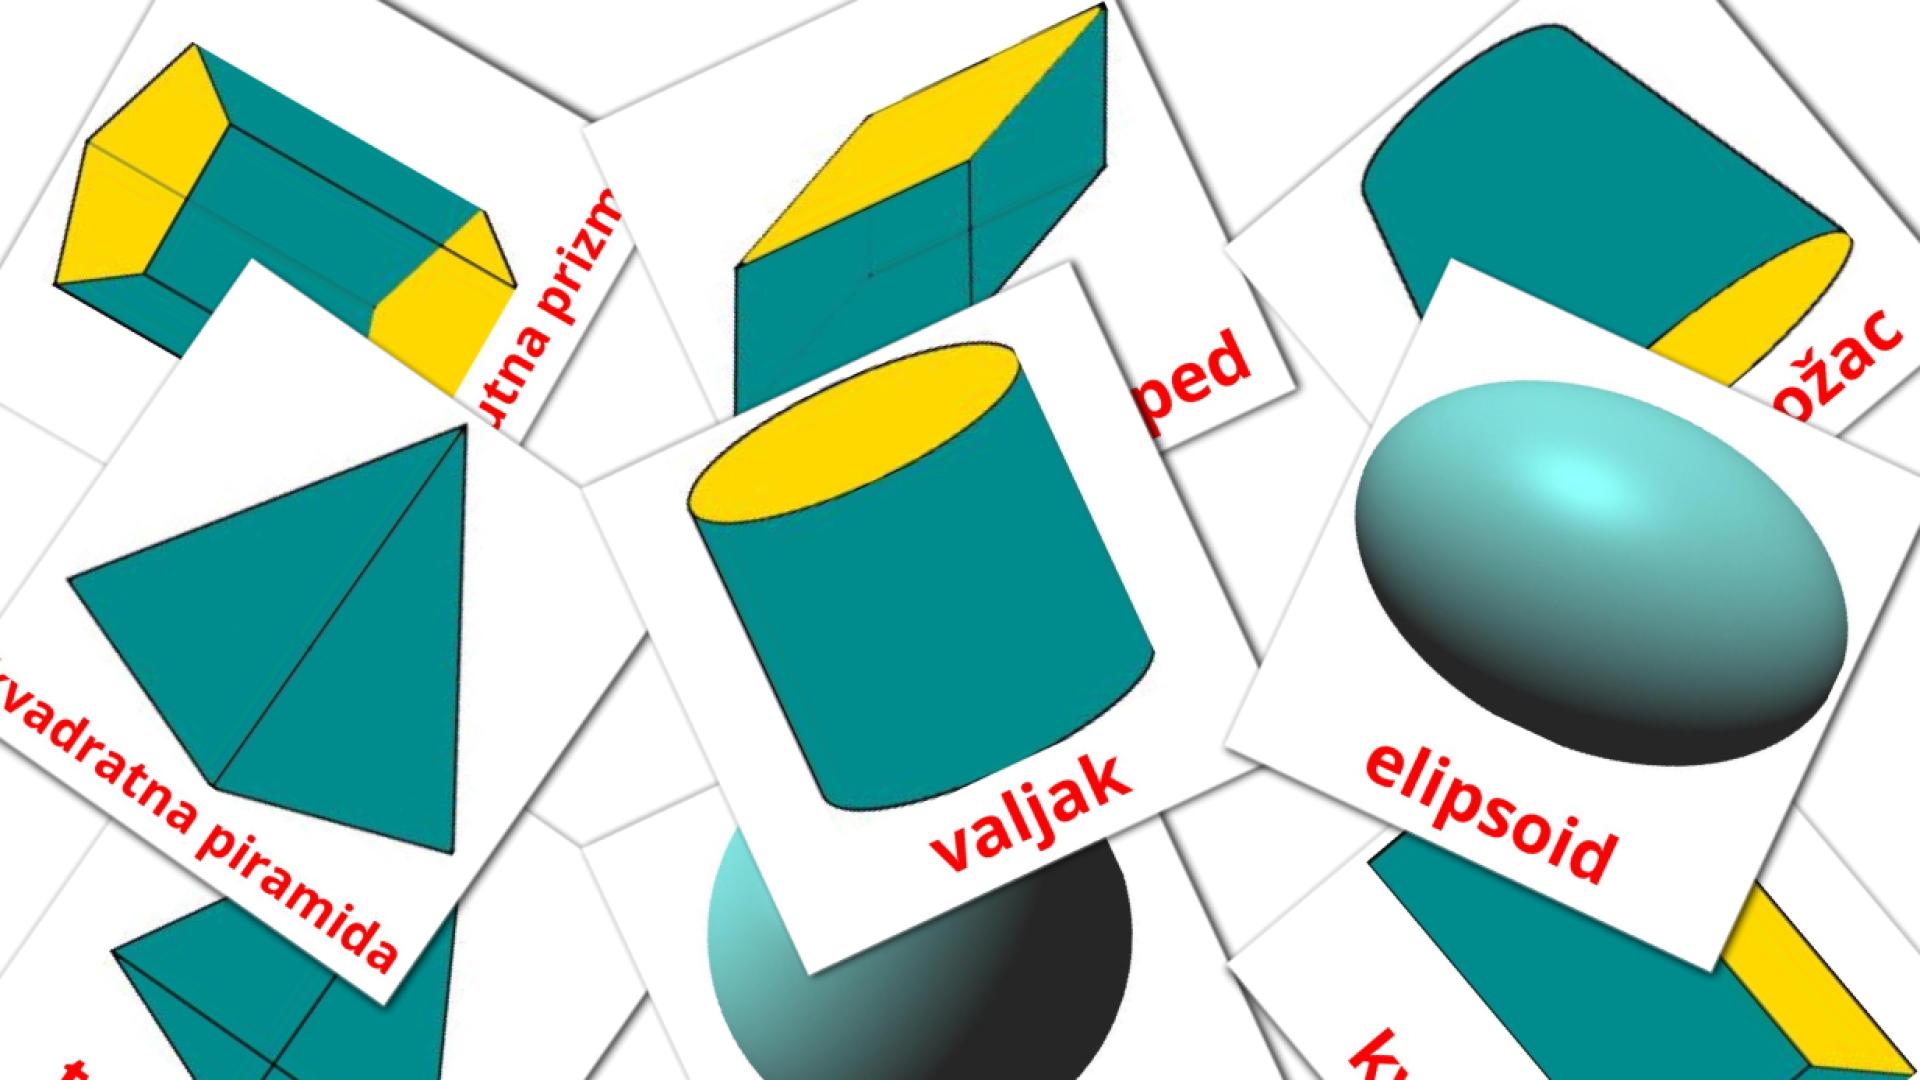 3D Shapes flashcards